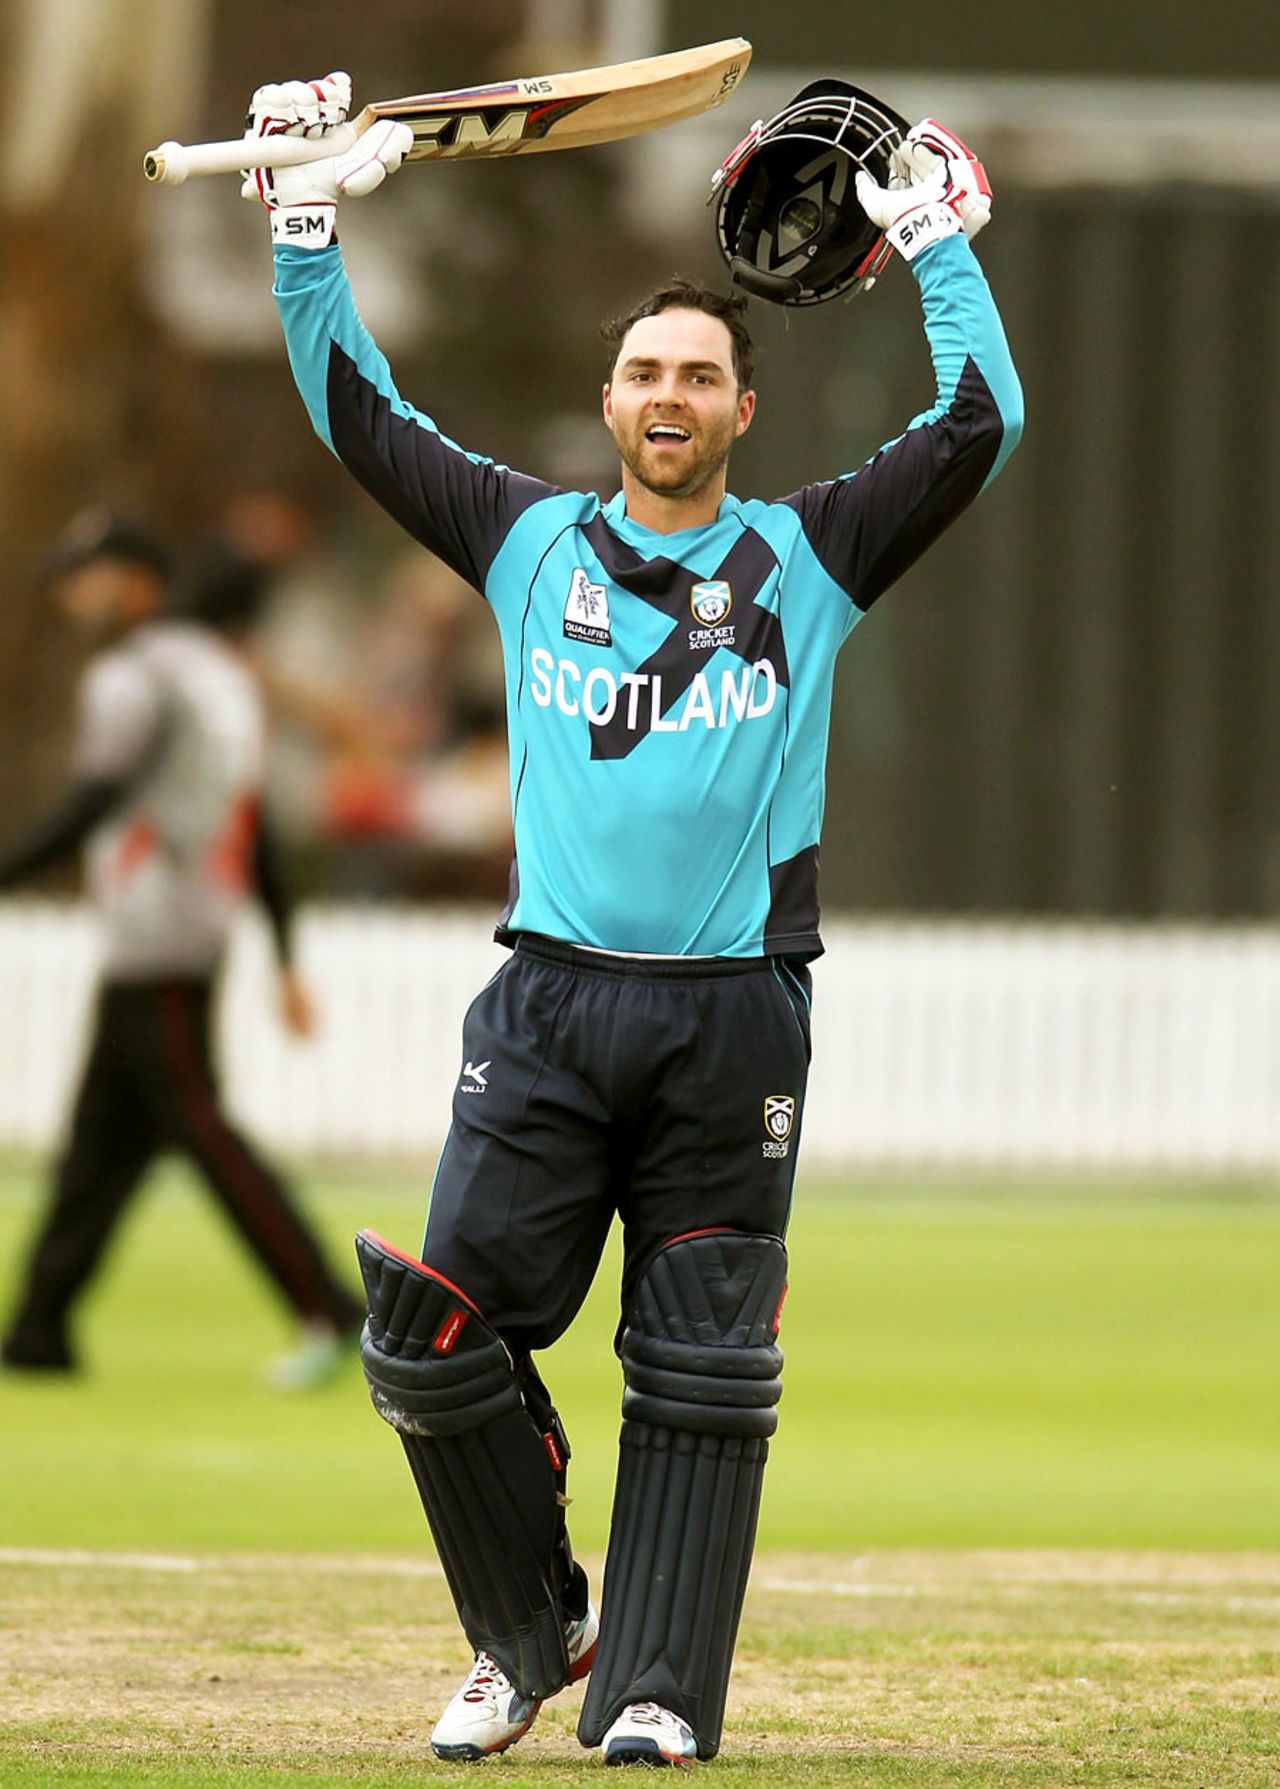 Preston Mommsen led from the front with a century, Cricket World Cup Qualifier, final, Lincoln, February 1, 2014